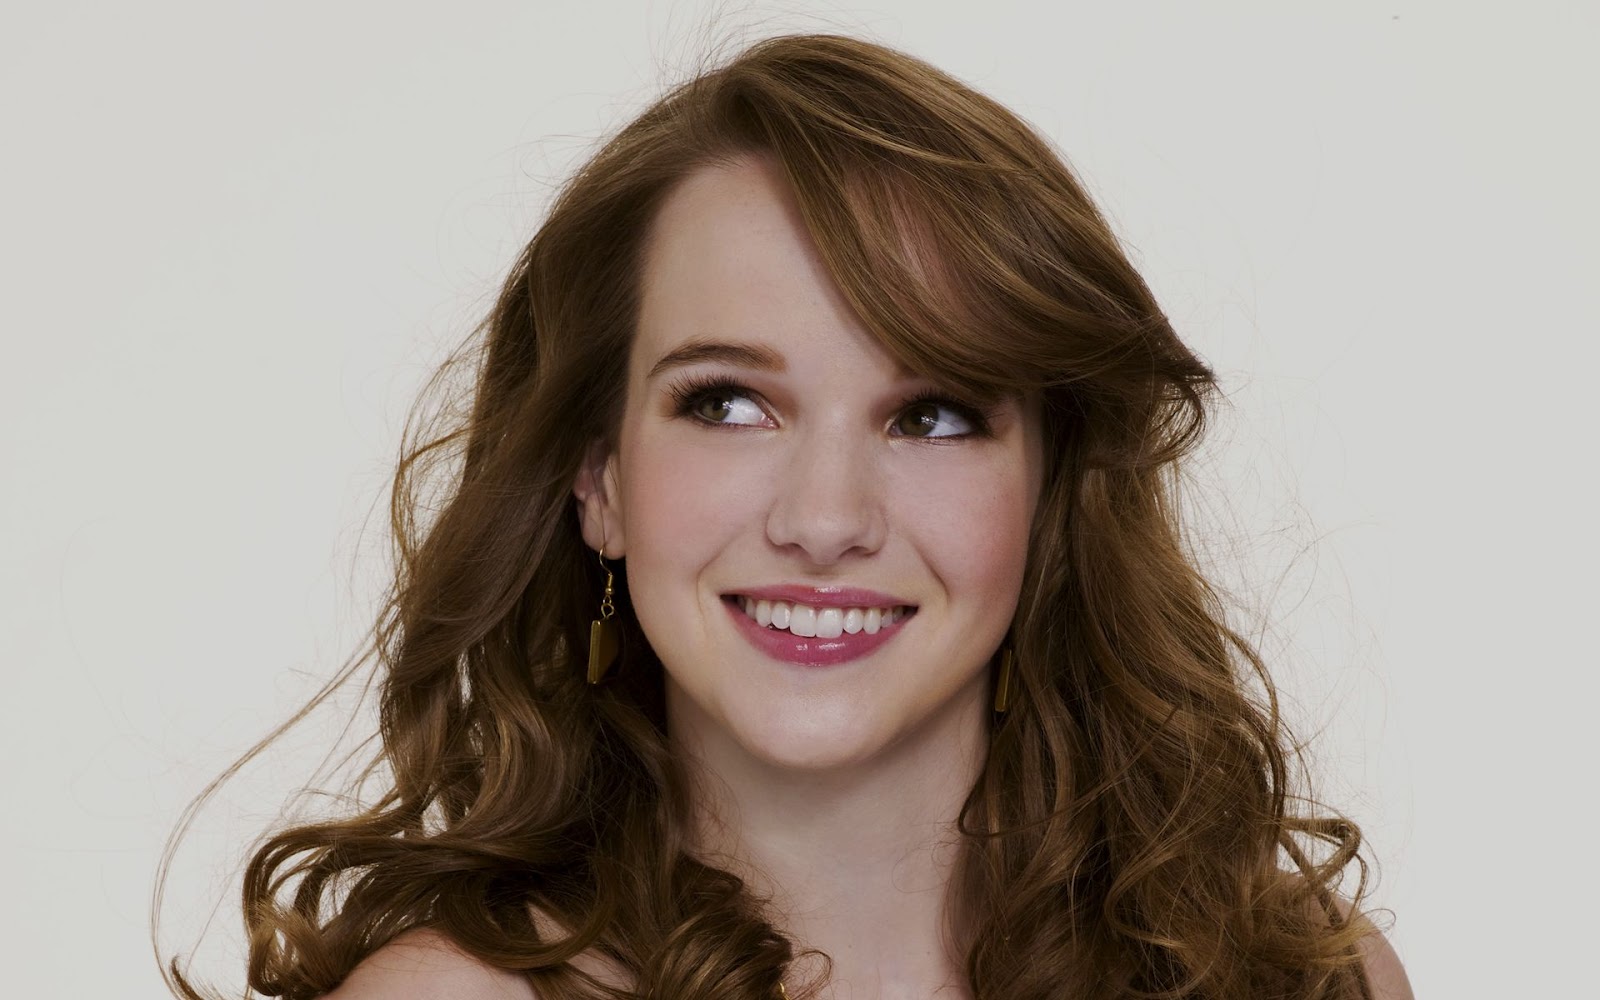 Hollywood Kay Panabaker Profile Pictures Image And Wallpaper